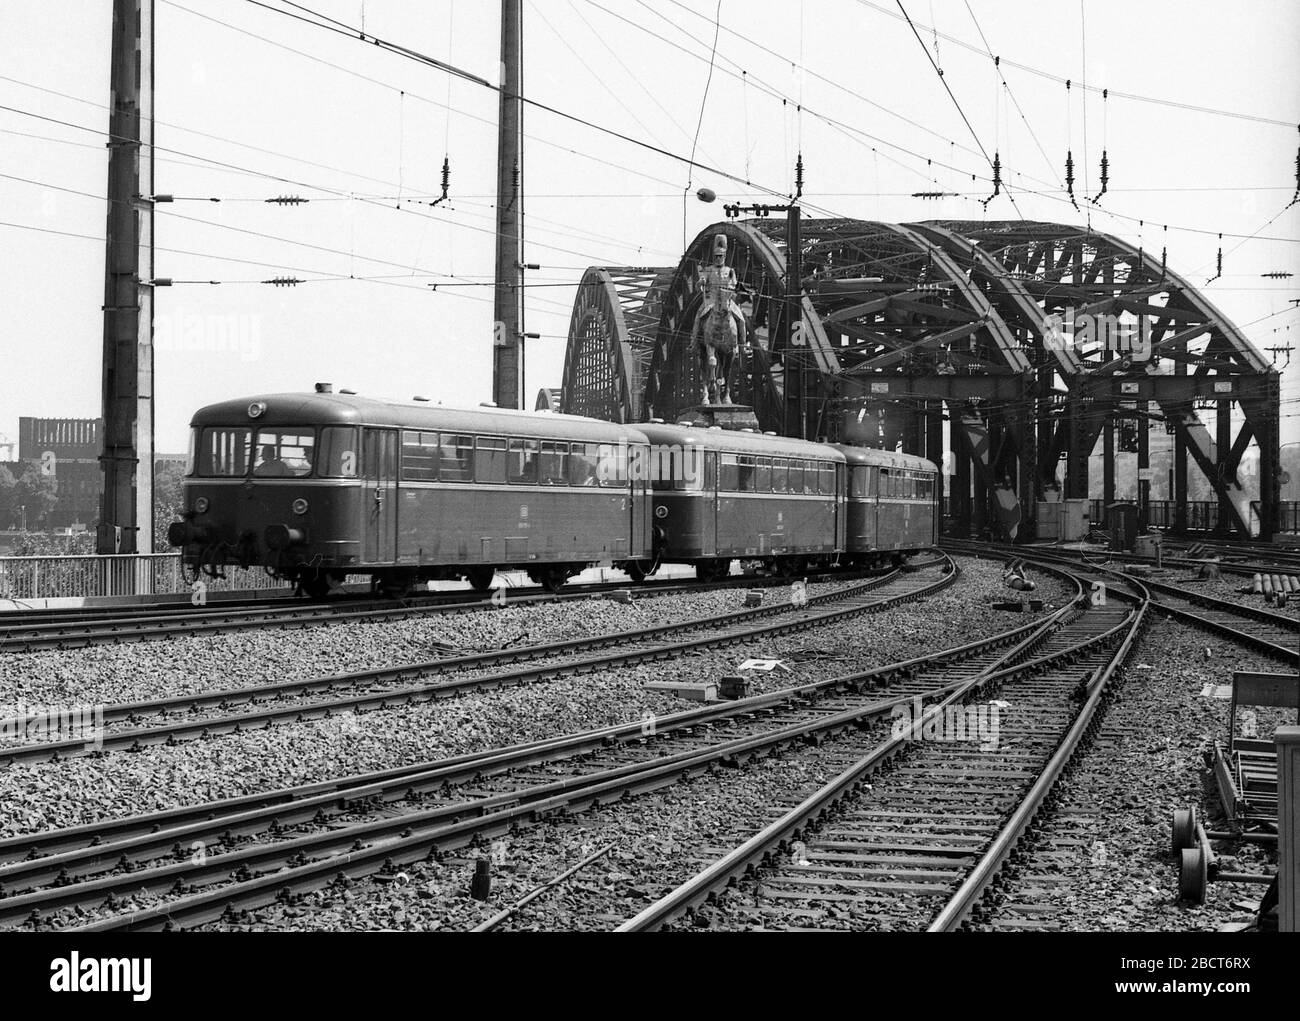 Train leaving Cologne Railway Station in Germany 1975 with electric locomotive trains Stock Photo